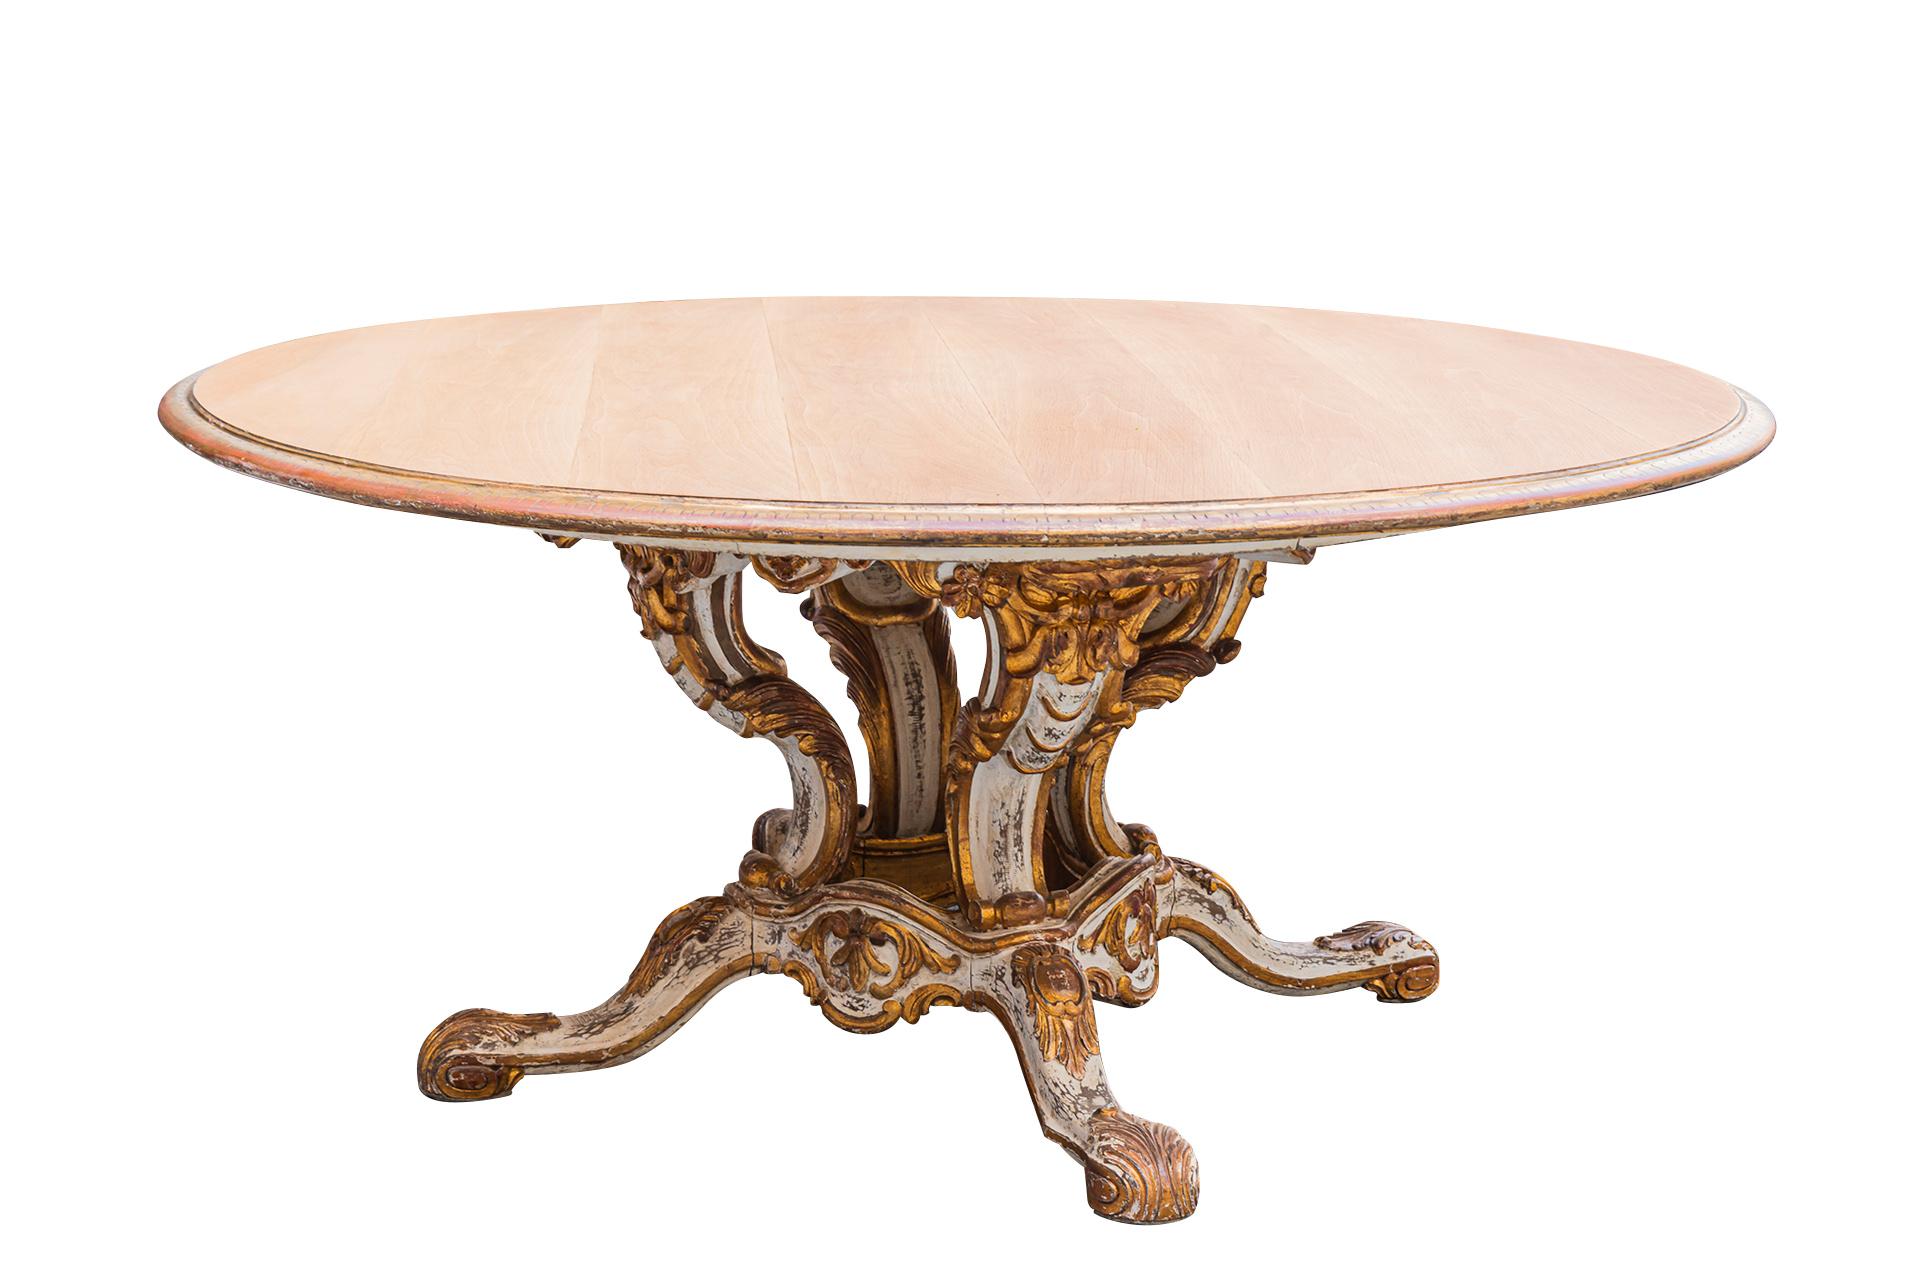 Pierre Lottier, important gueridon in the style of Rococo,
Sculpted and gilt wood, natural wood tabletop,
Sculpted feet and struts decorated with foliage and 